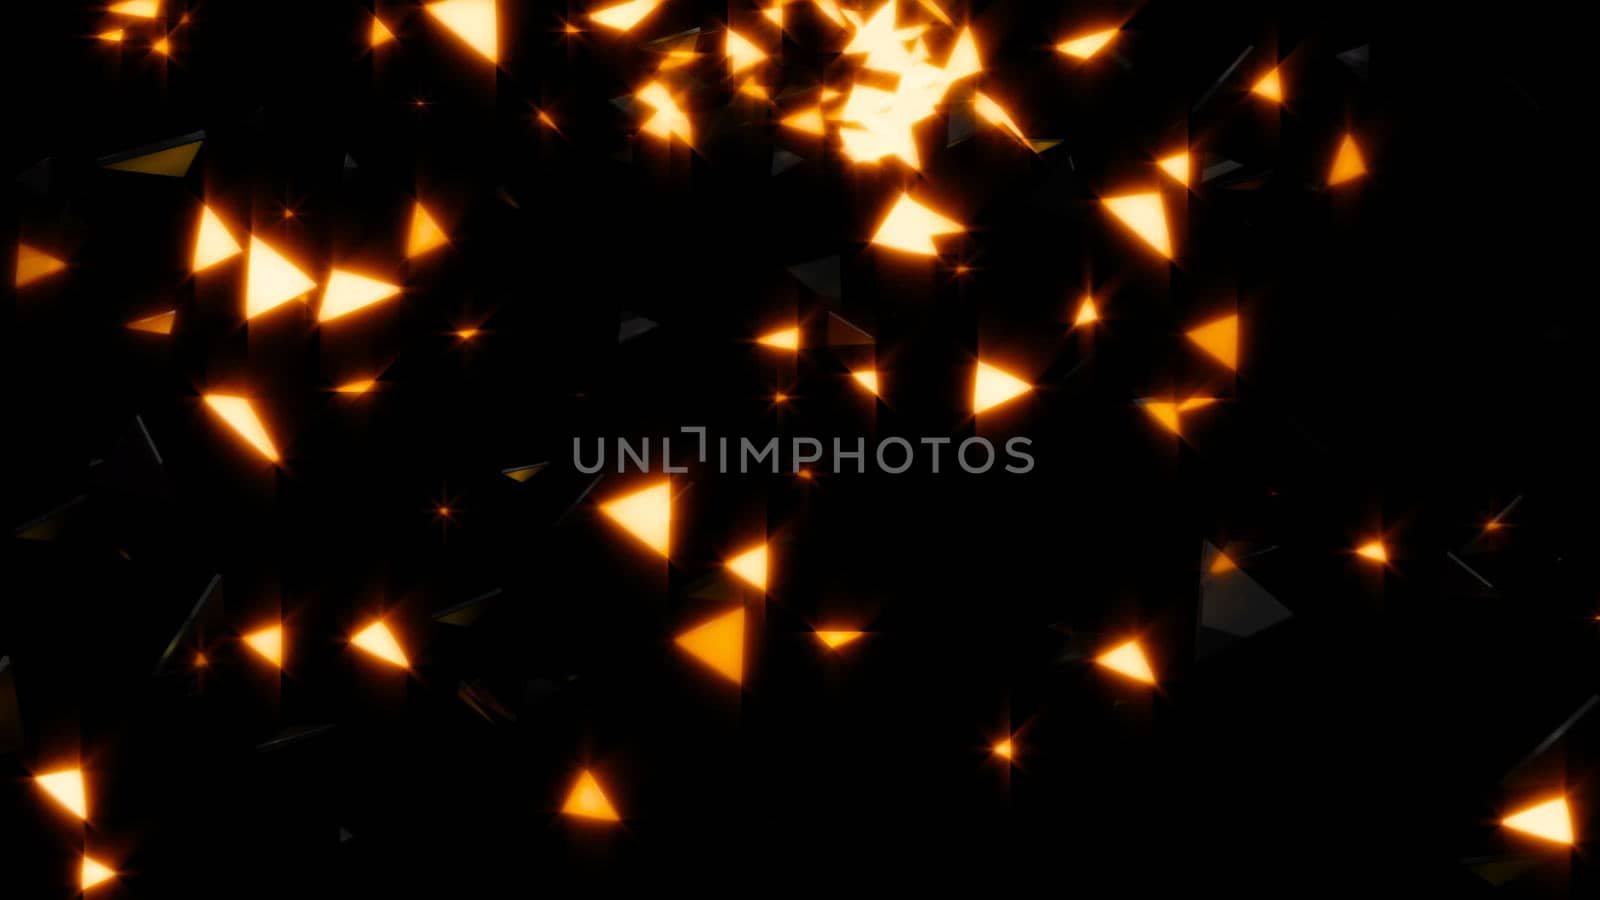 Abstract background with gold particles and shapes by nolimit046